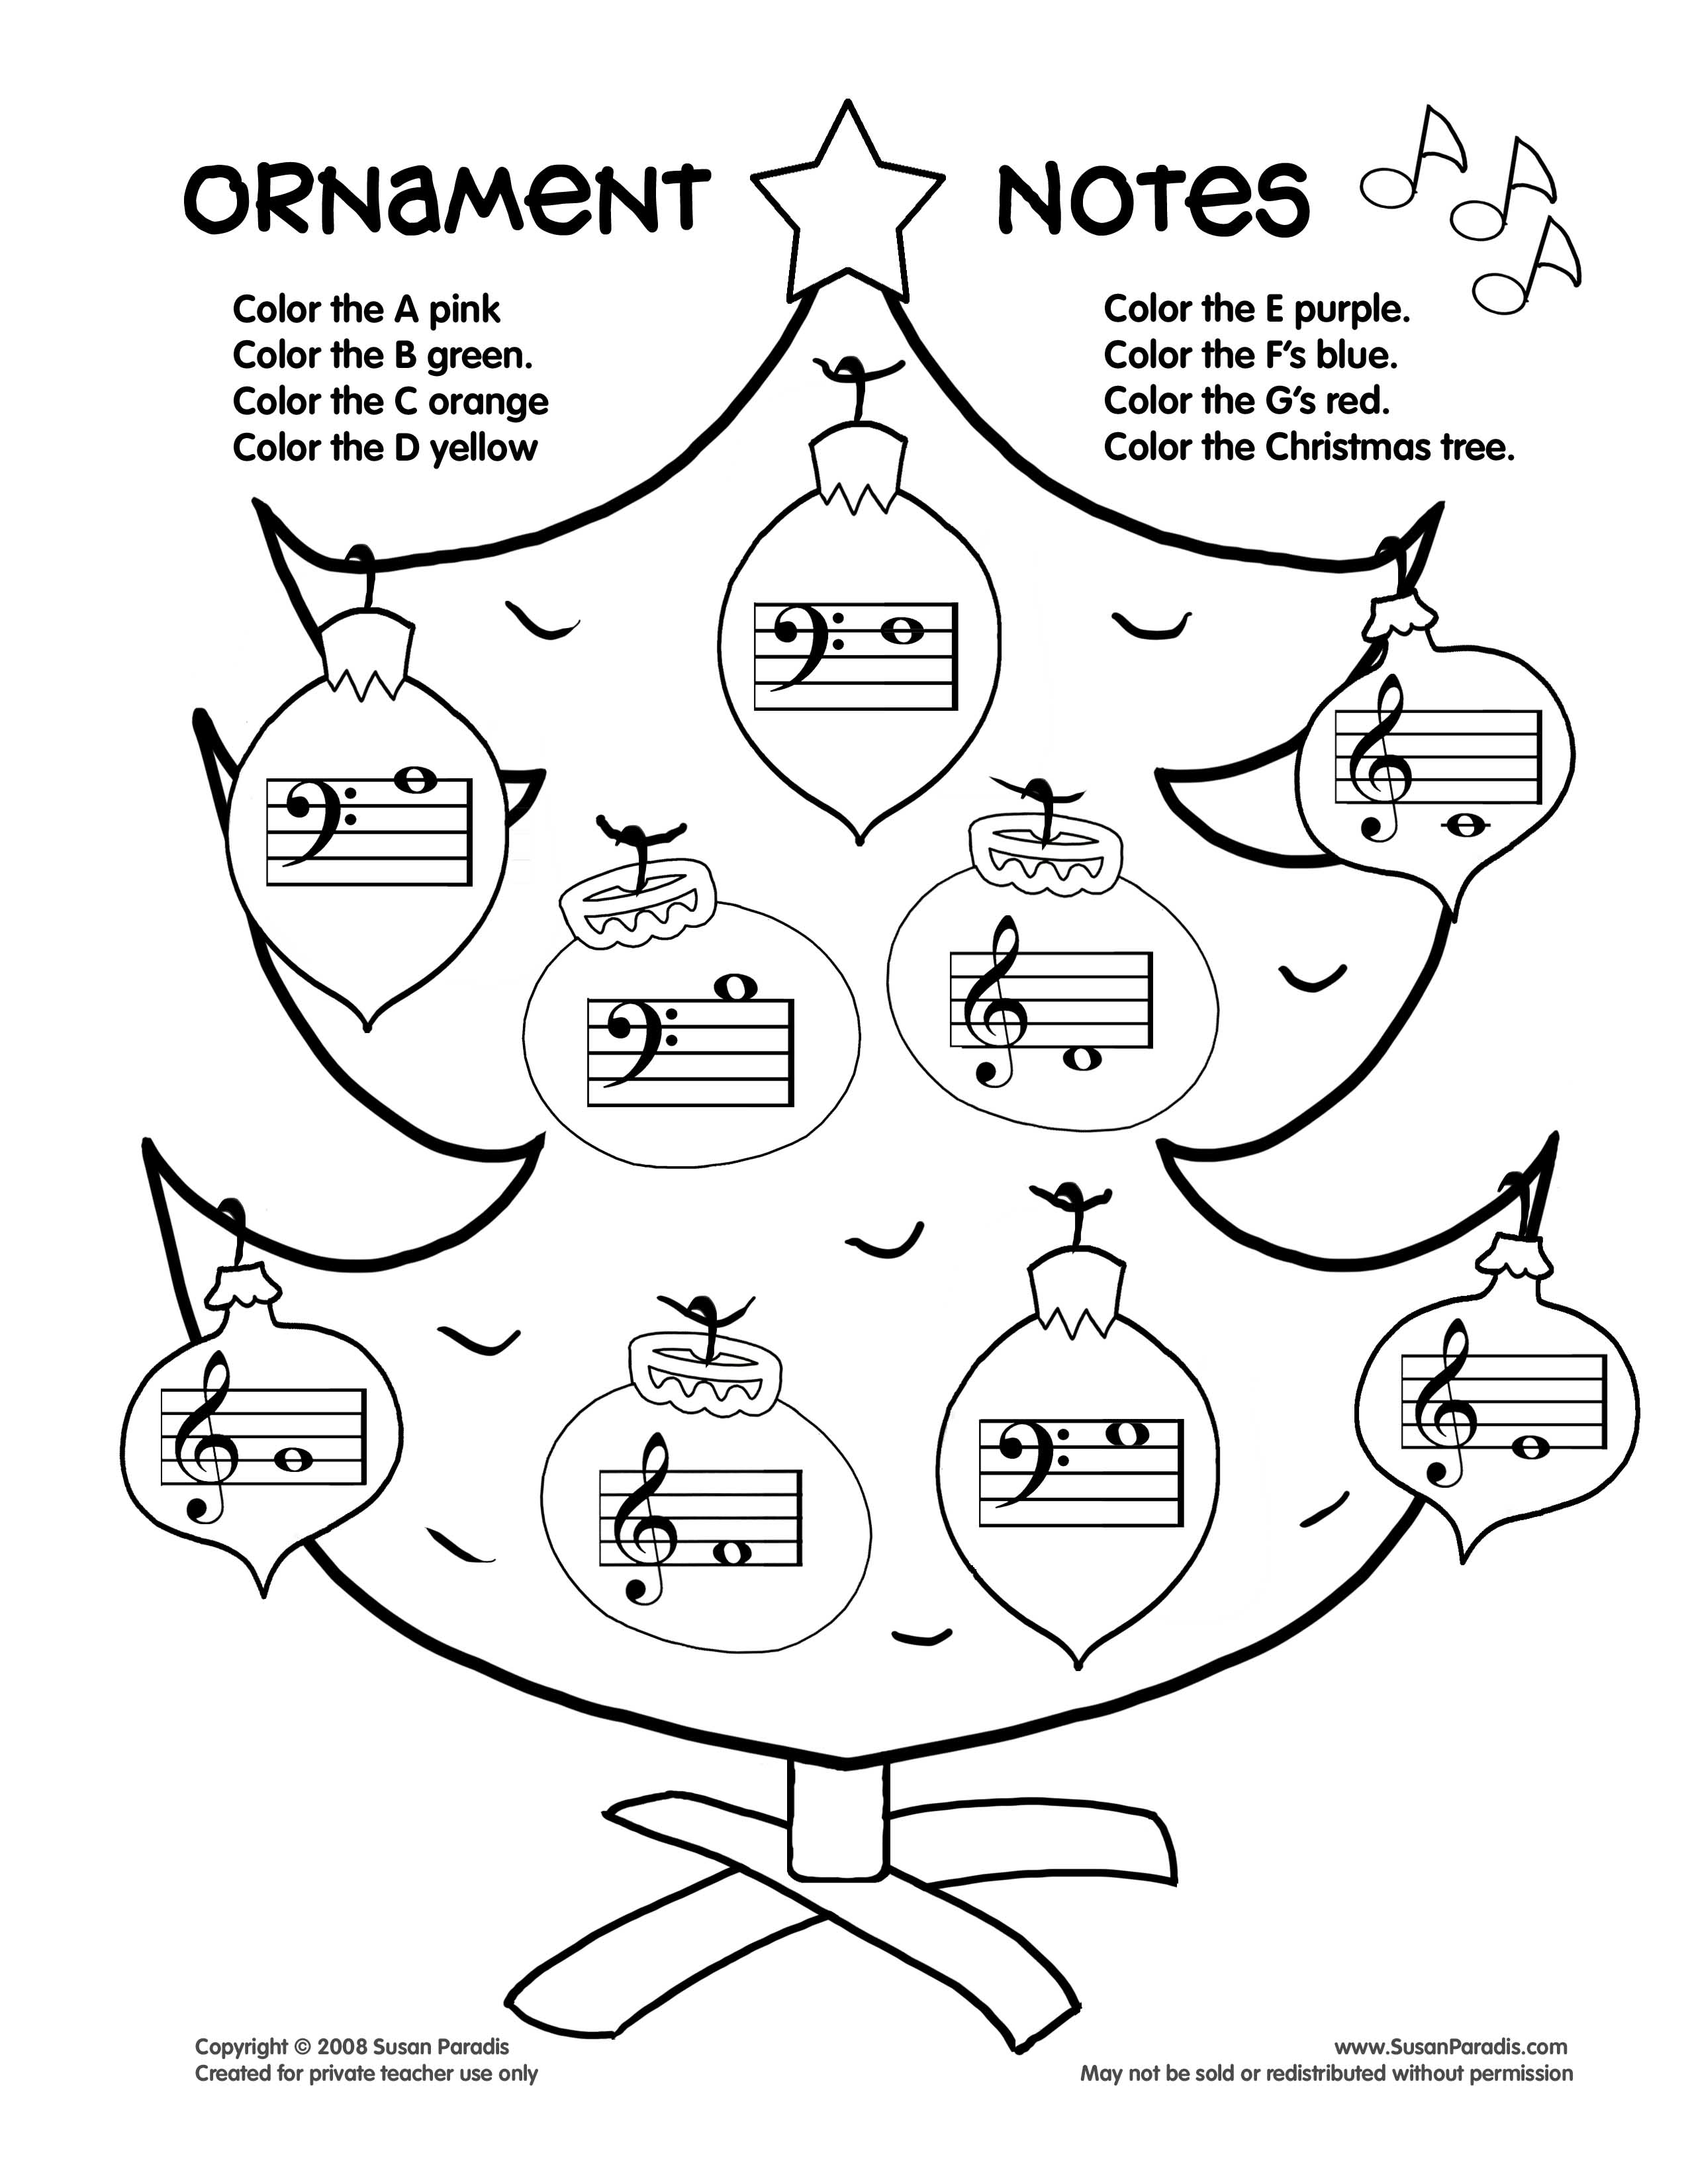 music-notes-coloring-pages-preschoolers-at-getdrawings-free-download